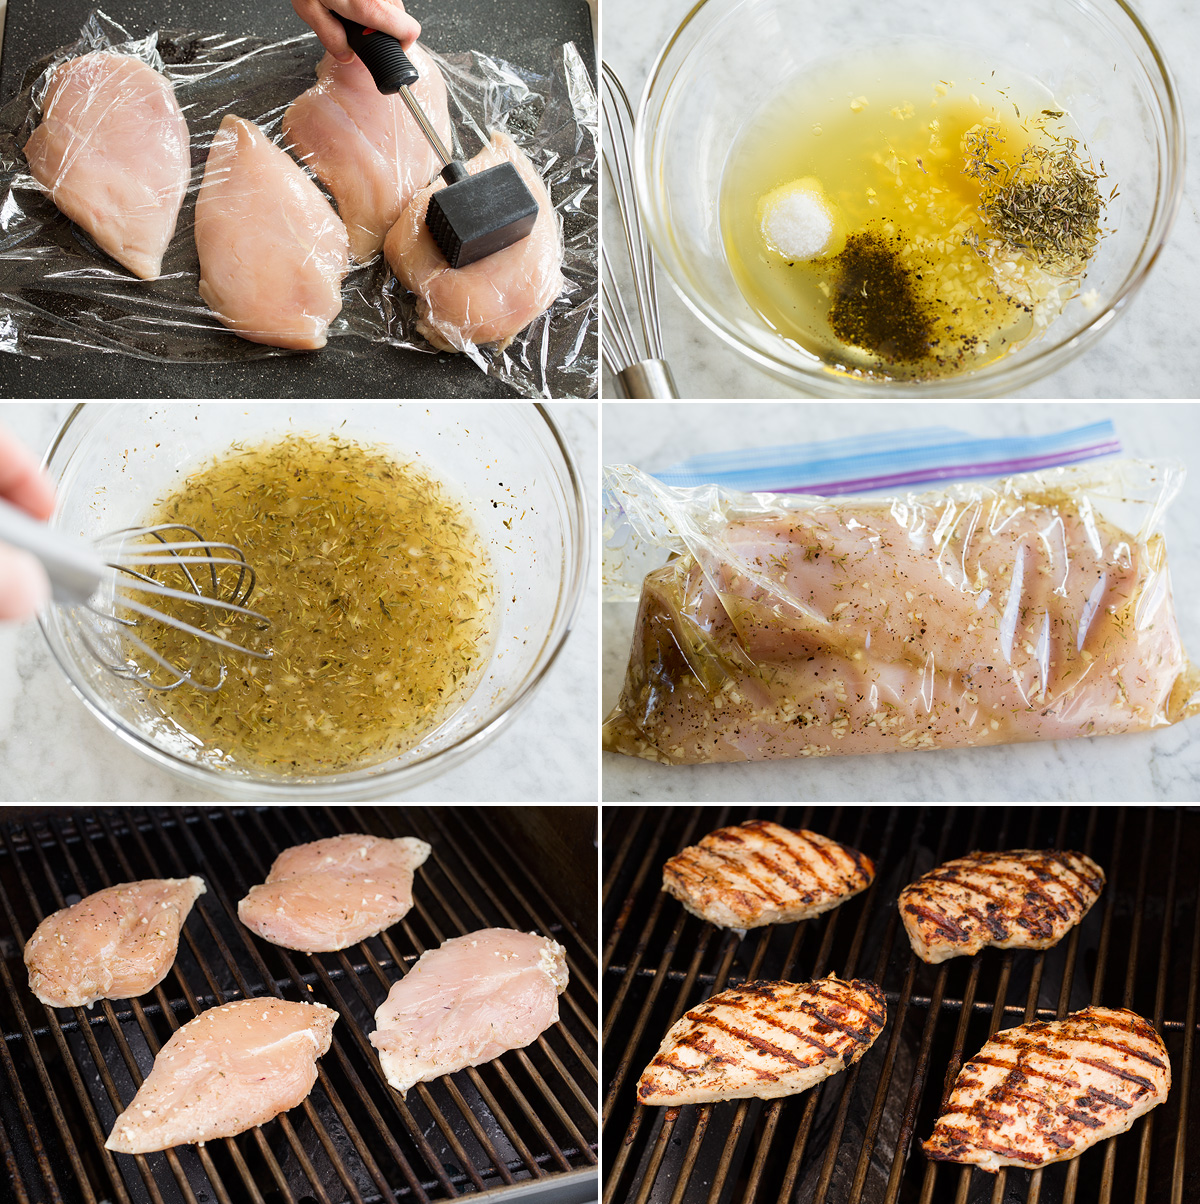 Six photos showing steps of making grilled chicken breasts and brine marinade.